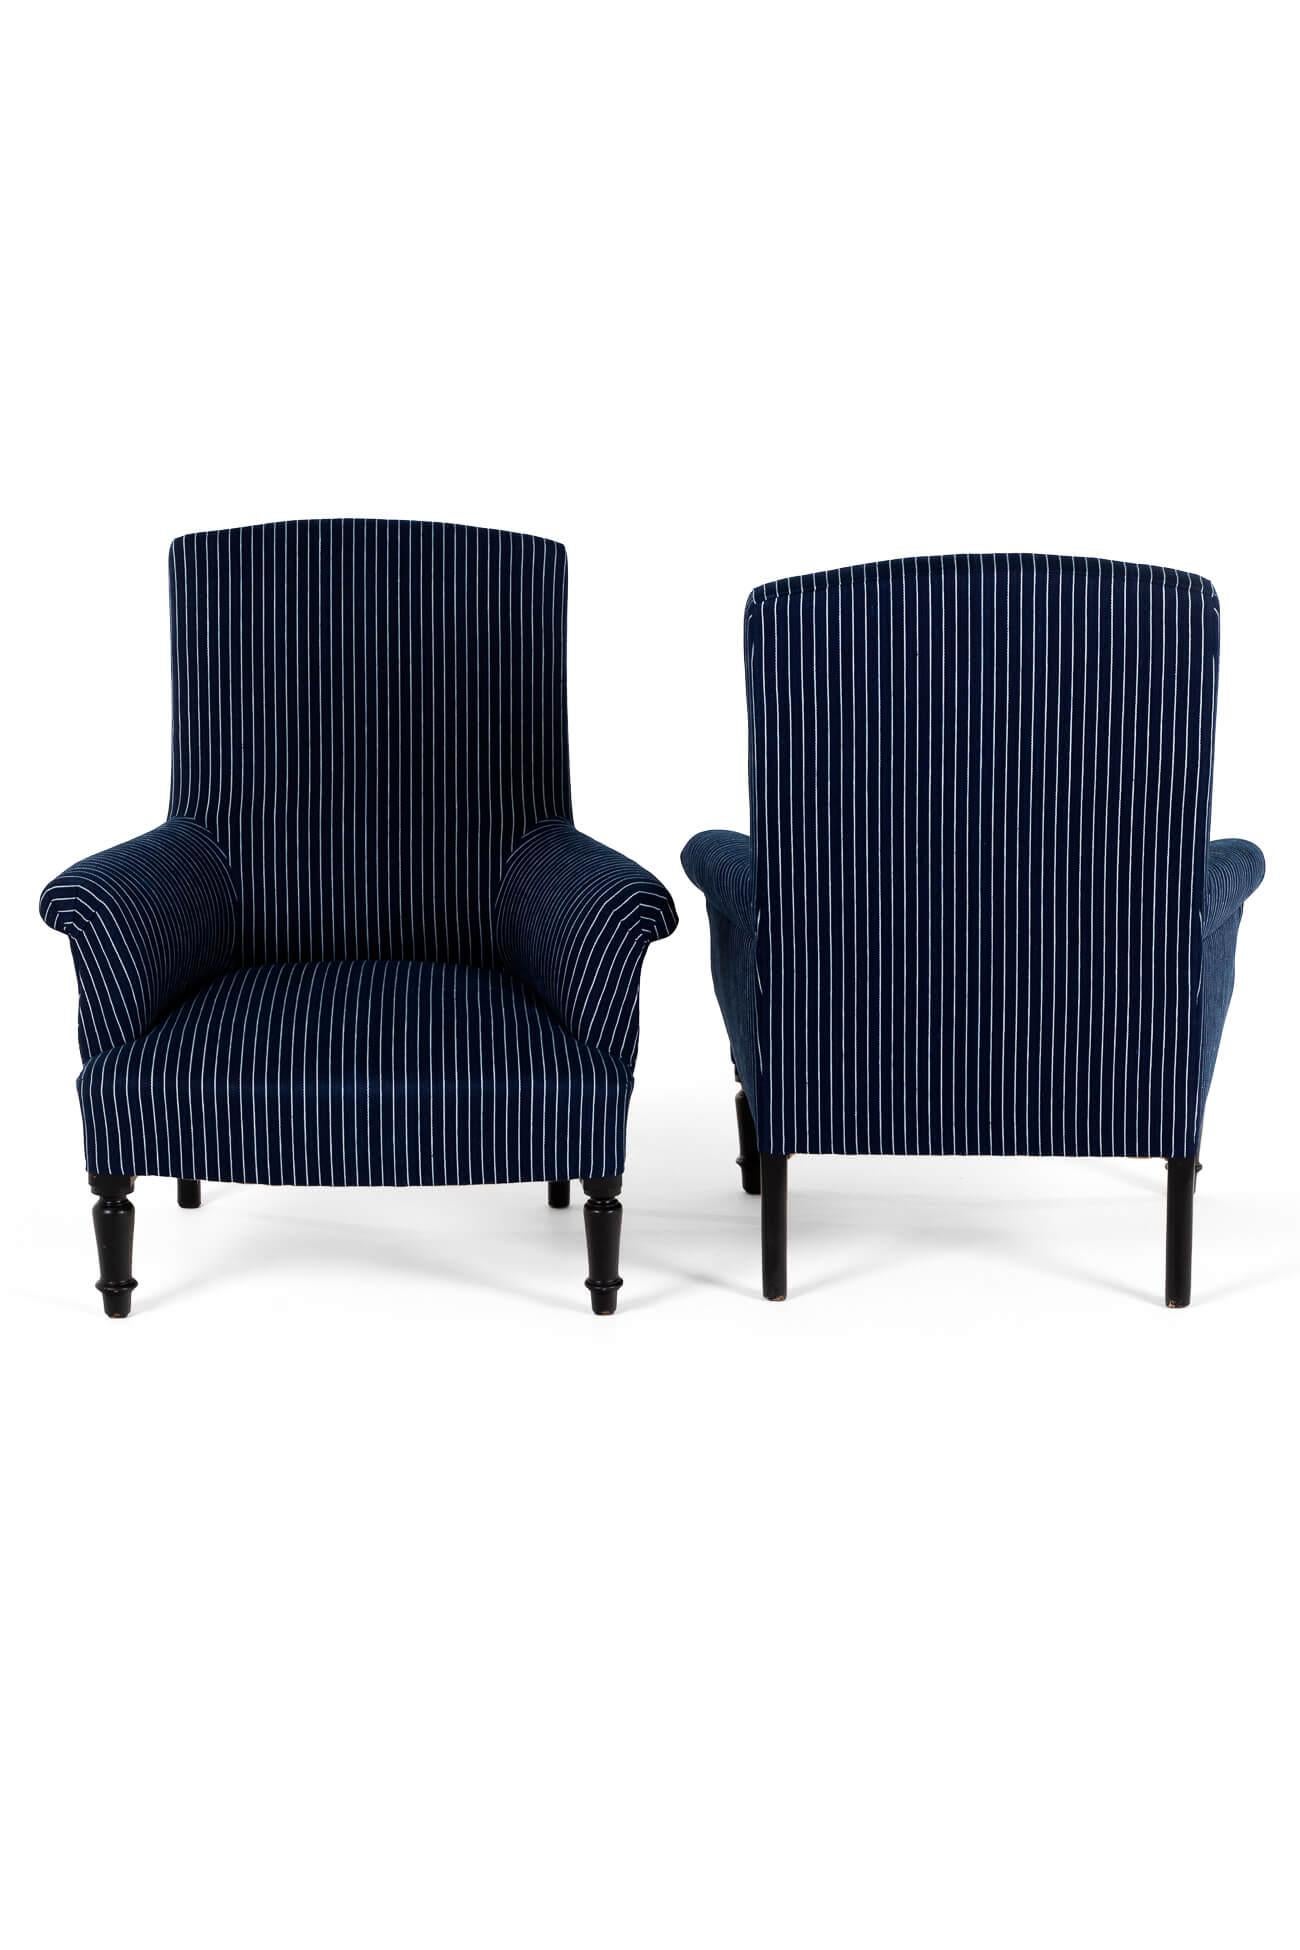 French Pair of Napoleon armchairs in Woven Navy Stripe For Sale